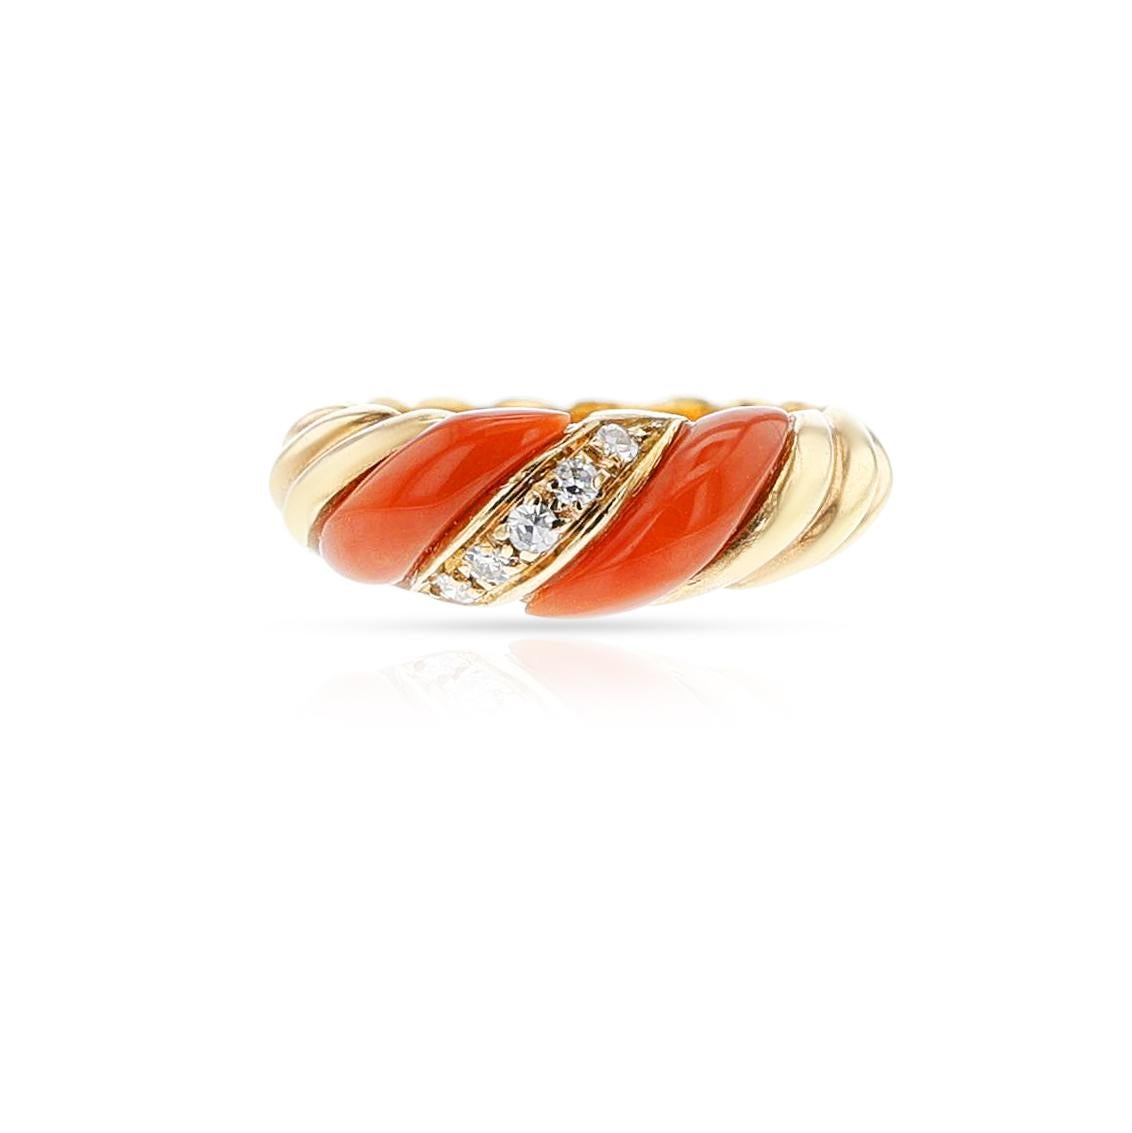 A Coral, Diamond and Gold Twisted Ring, 18k. The total weight of the ring is 5.70 grams. The ring size is US 5.25.

SKU: 1115-CJARTYU.